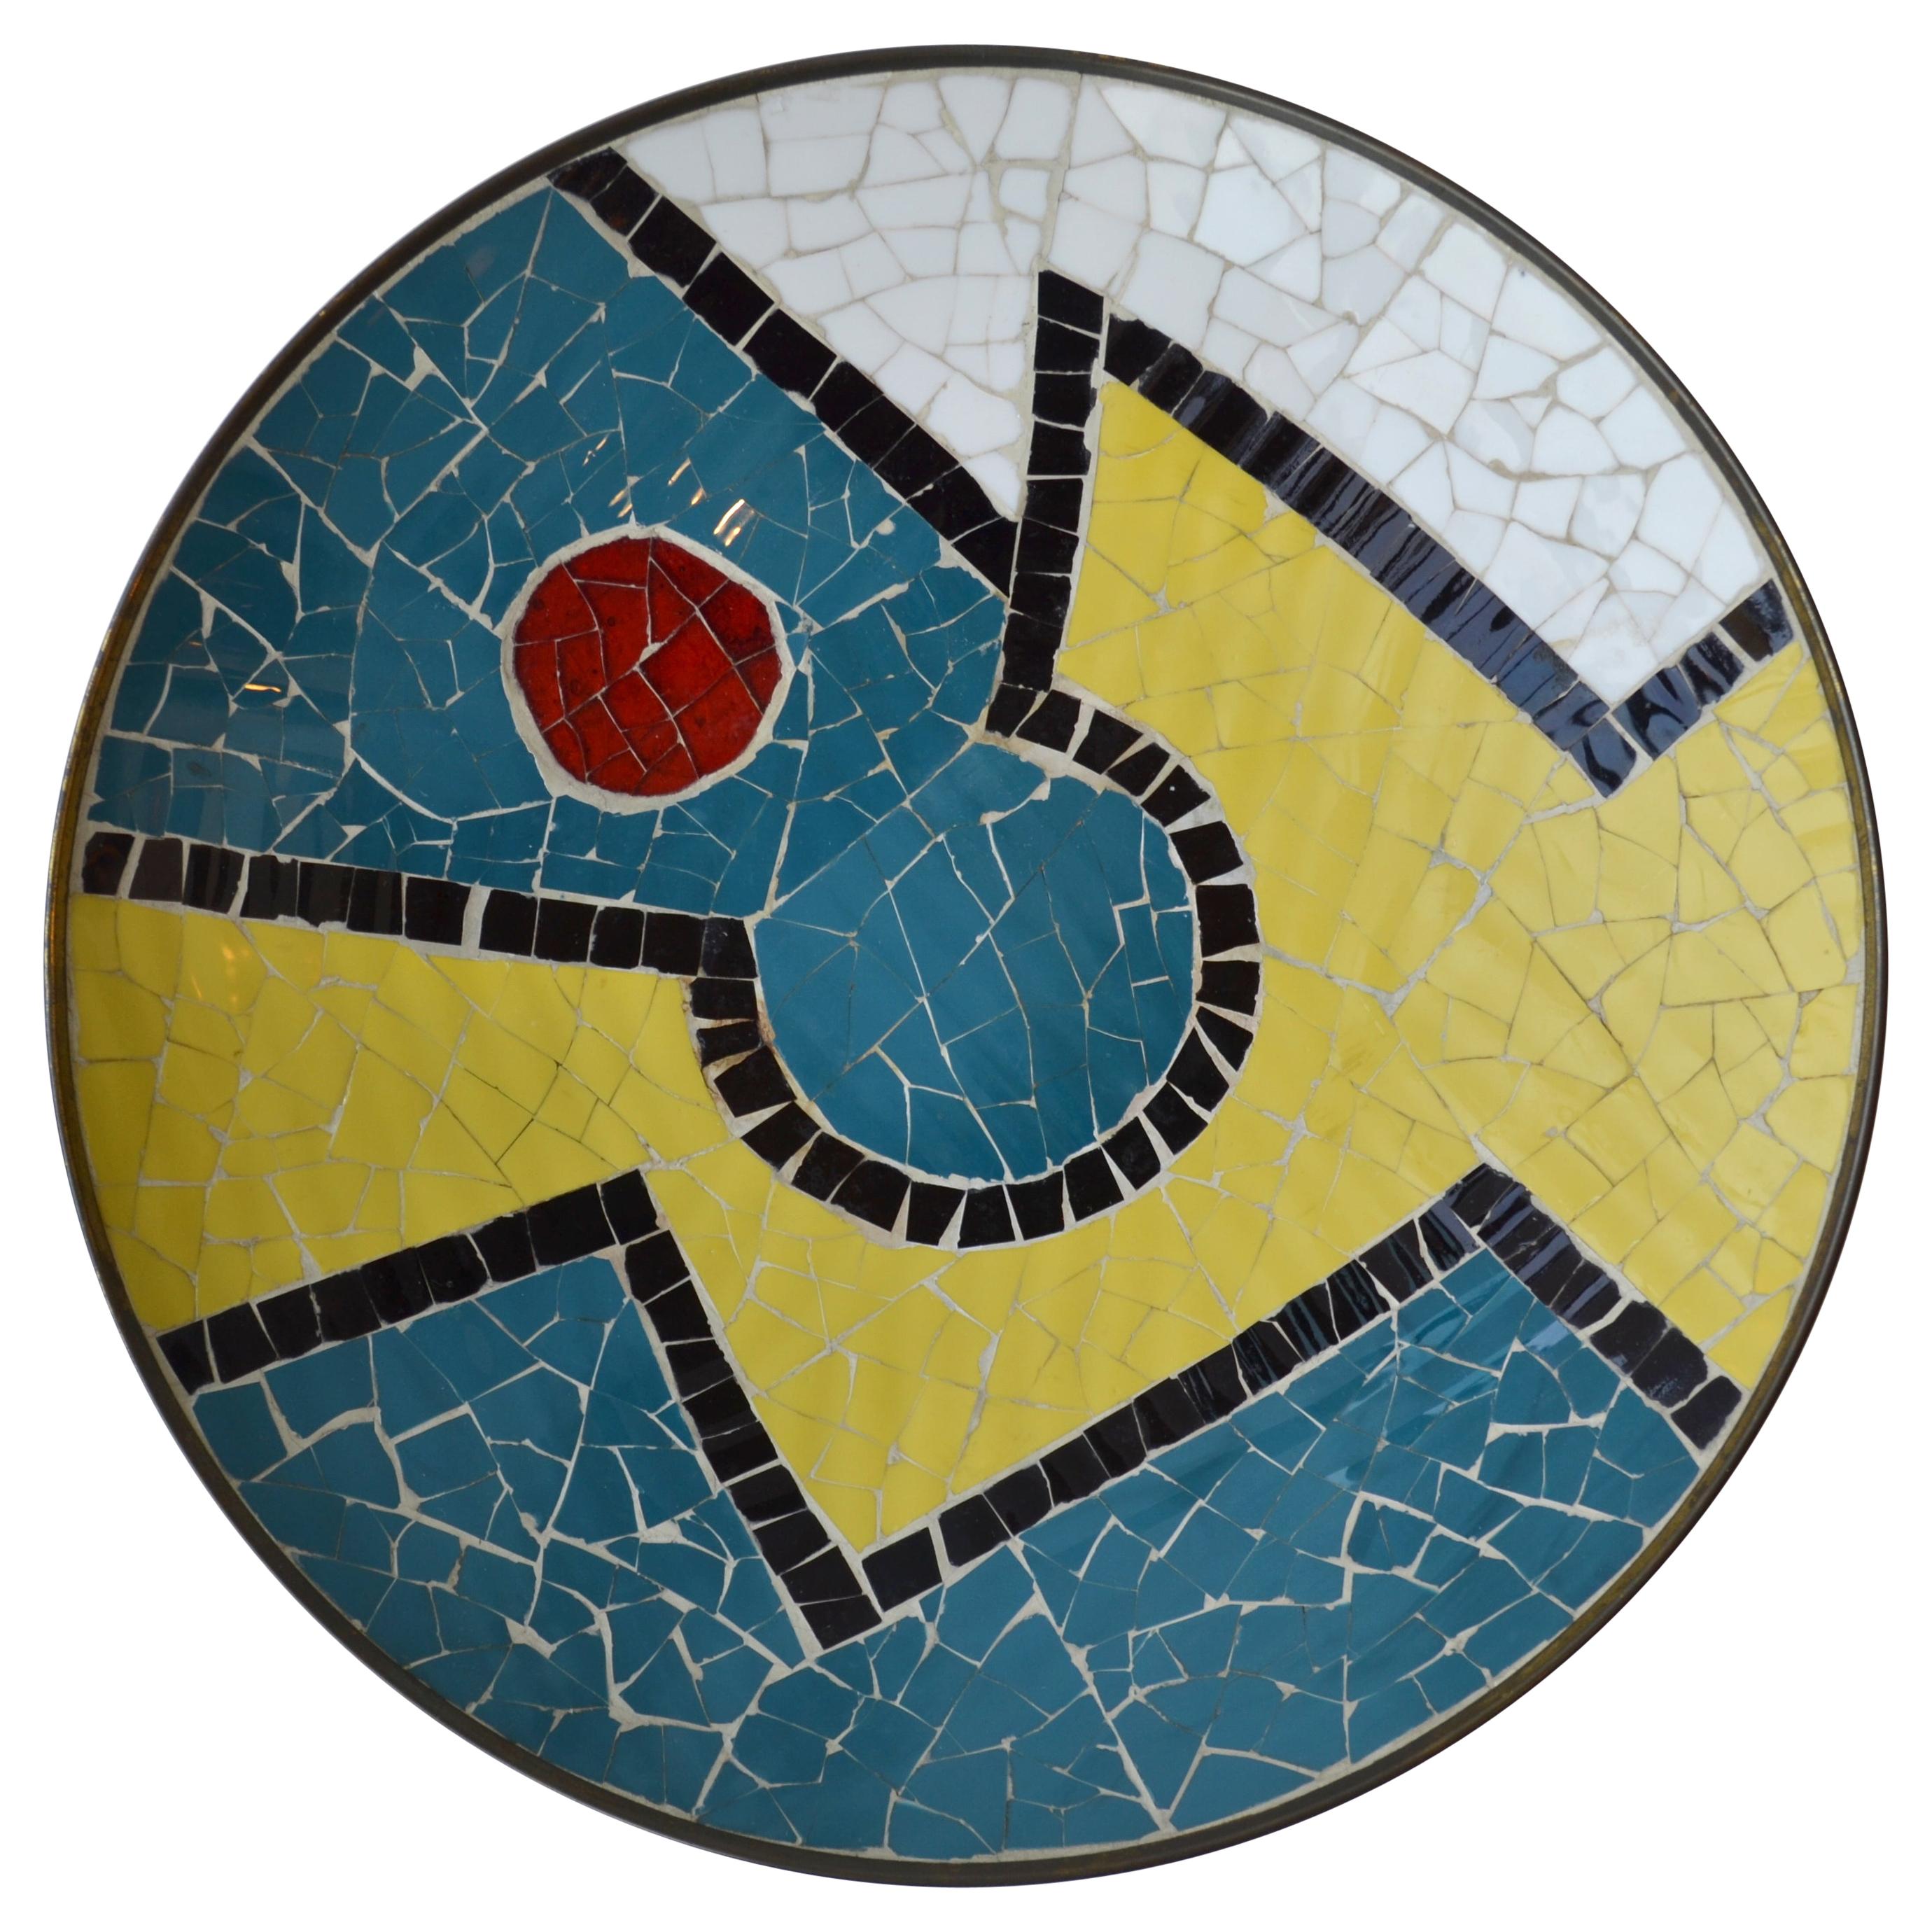 Charger & Wall Plate in Brass with Colorful Mosaic Motive